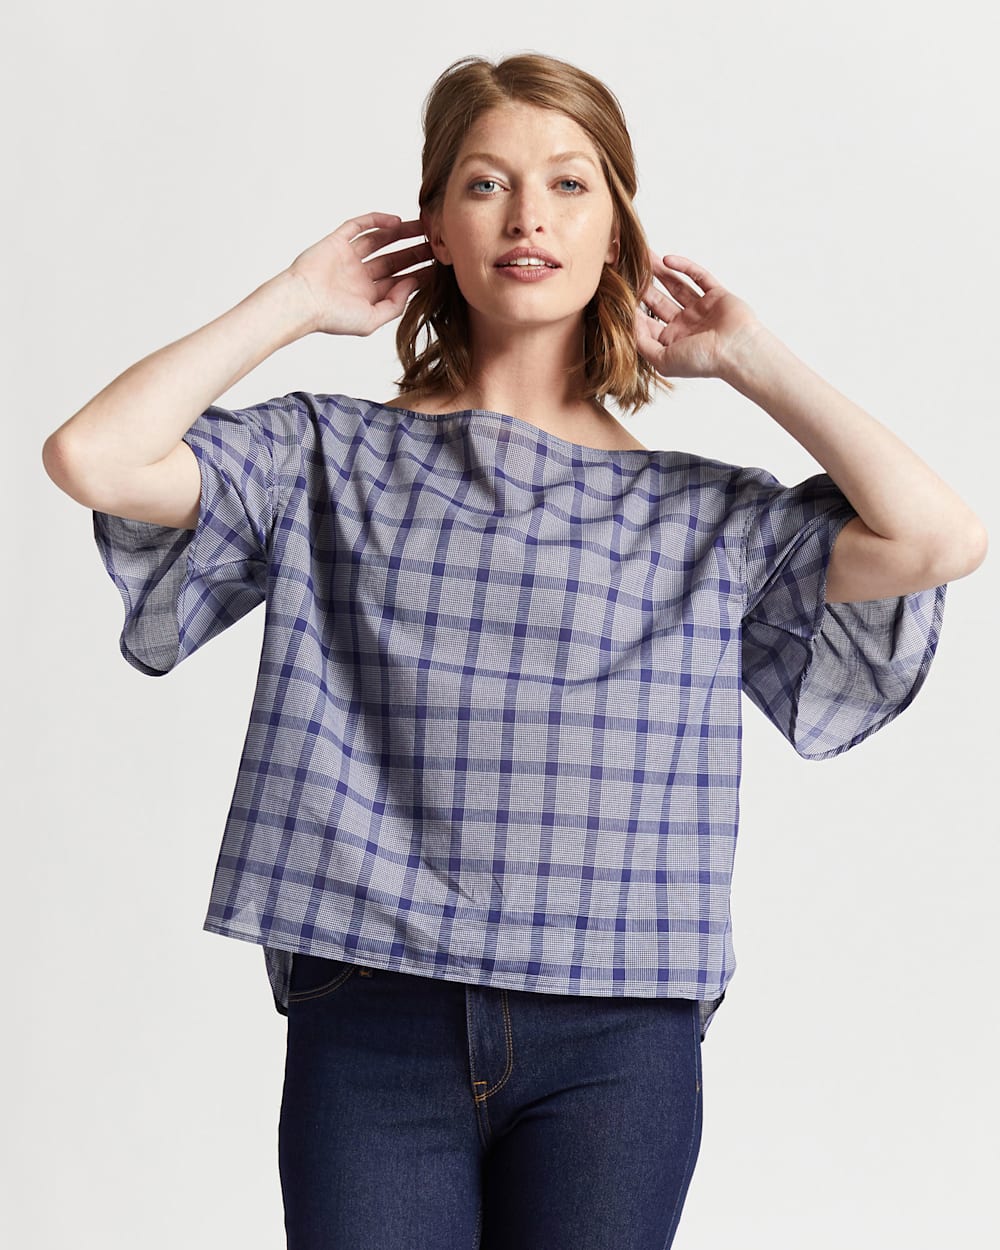 ALTERNATE VIEW OF WOMEN'S AIRY SHORT-SLEEVE BOATNECK TOP IN NAVY/WHITE PLAID image number 5